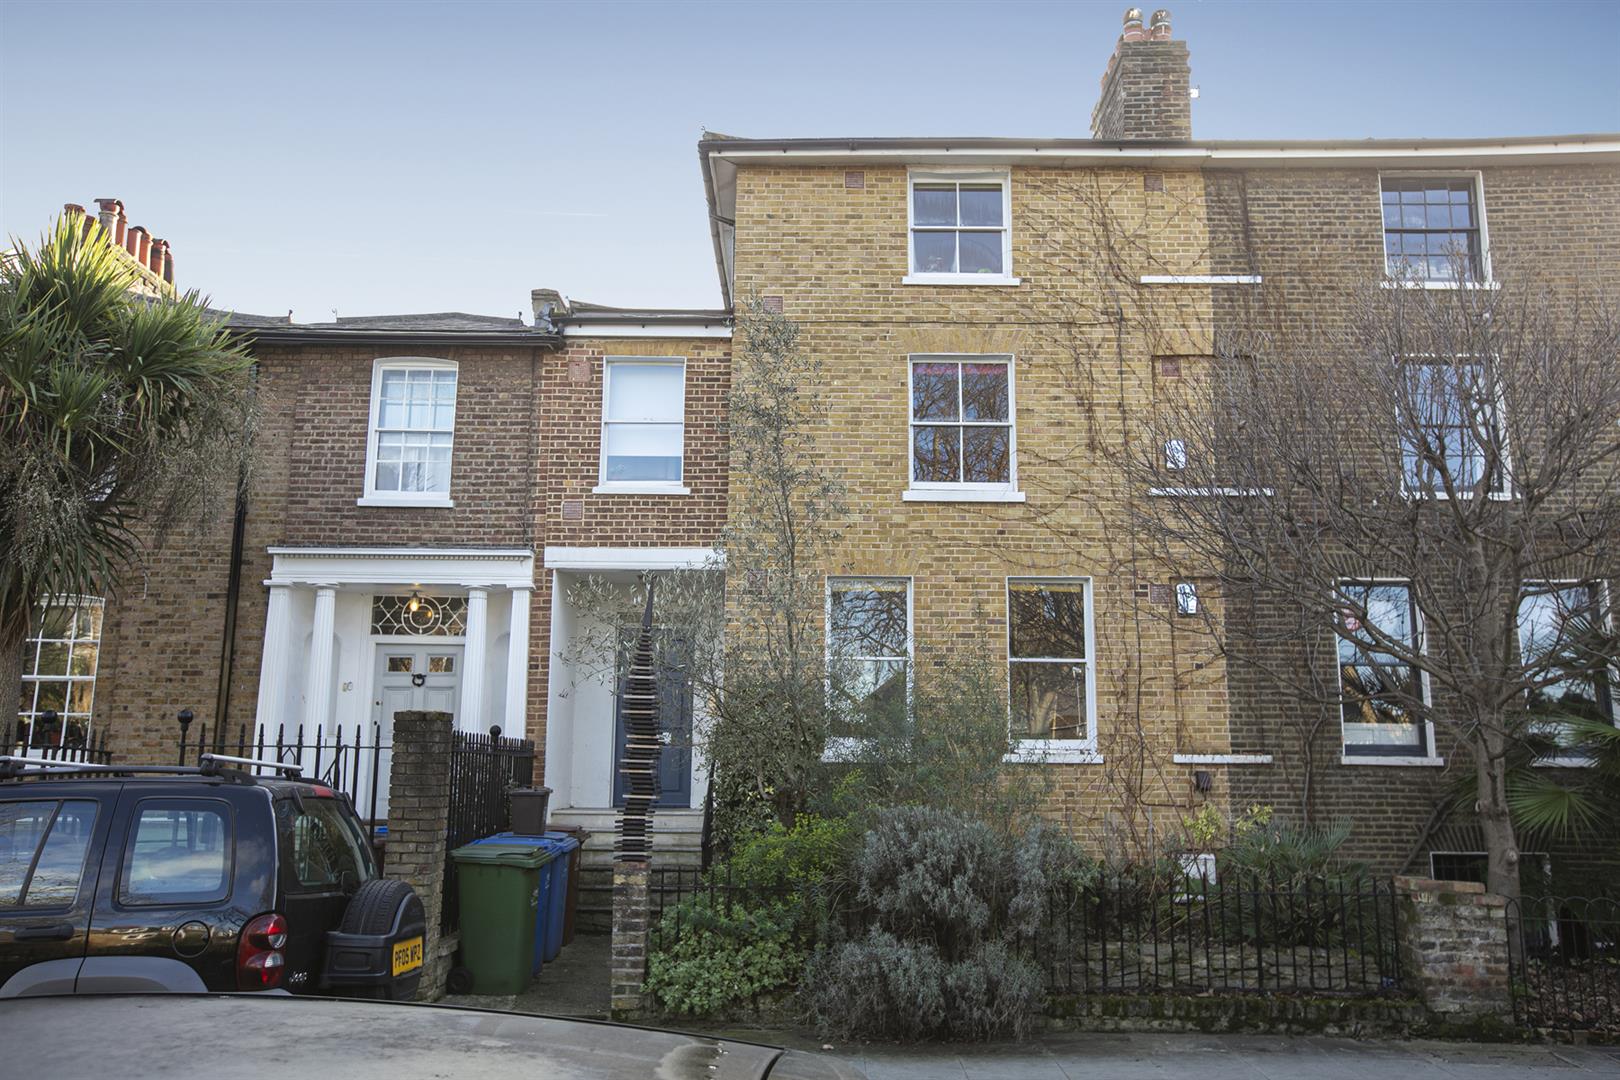 Flat - Conversion For Sale in Holly Grove, Peckham, SE15 893 view2